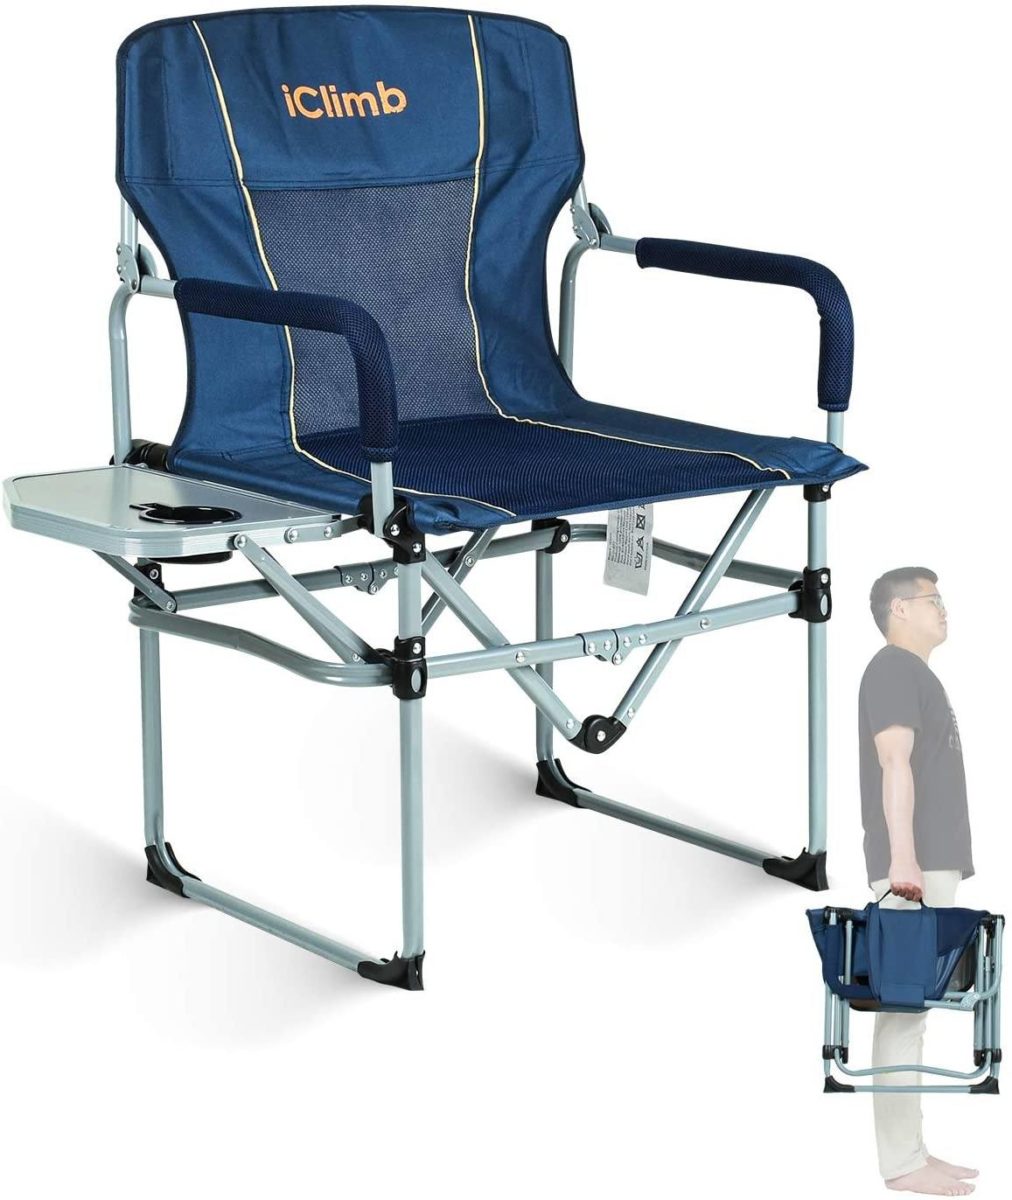 Top 10 Best Camping Chair for Heavy Person in 2022 - Camping Mind